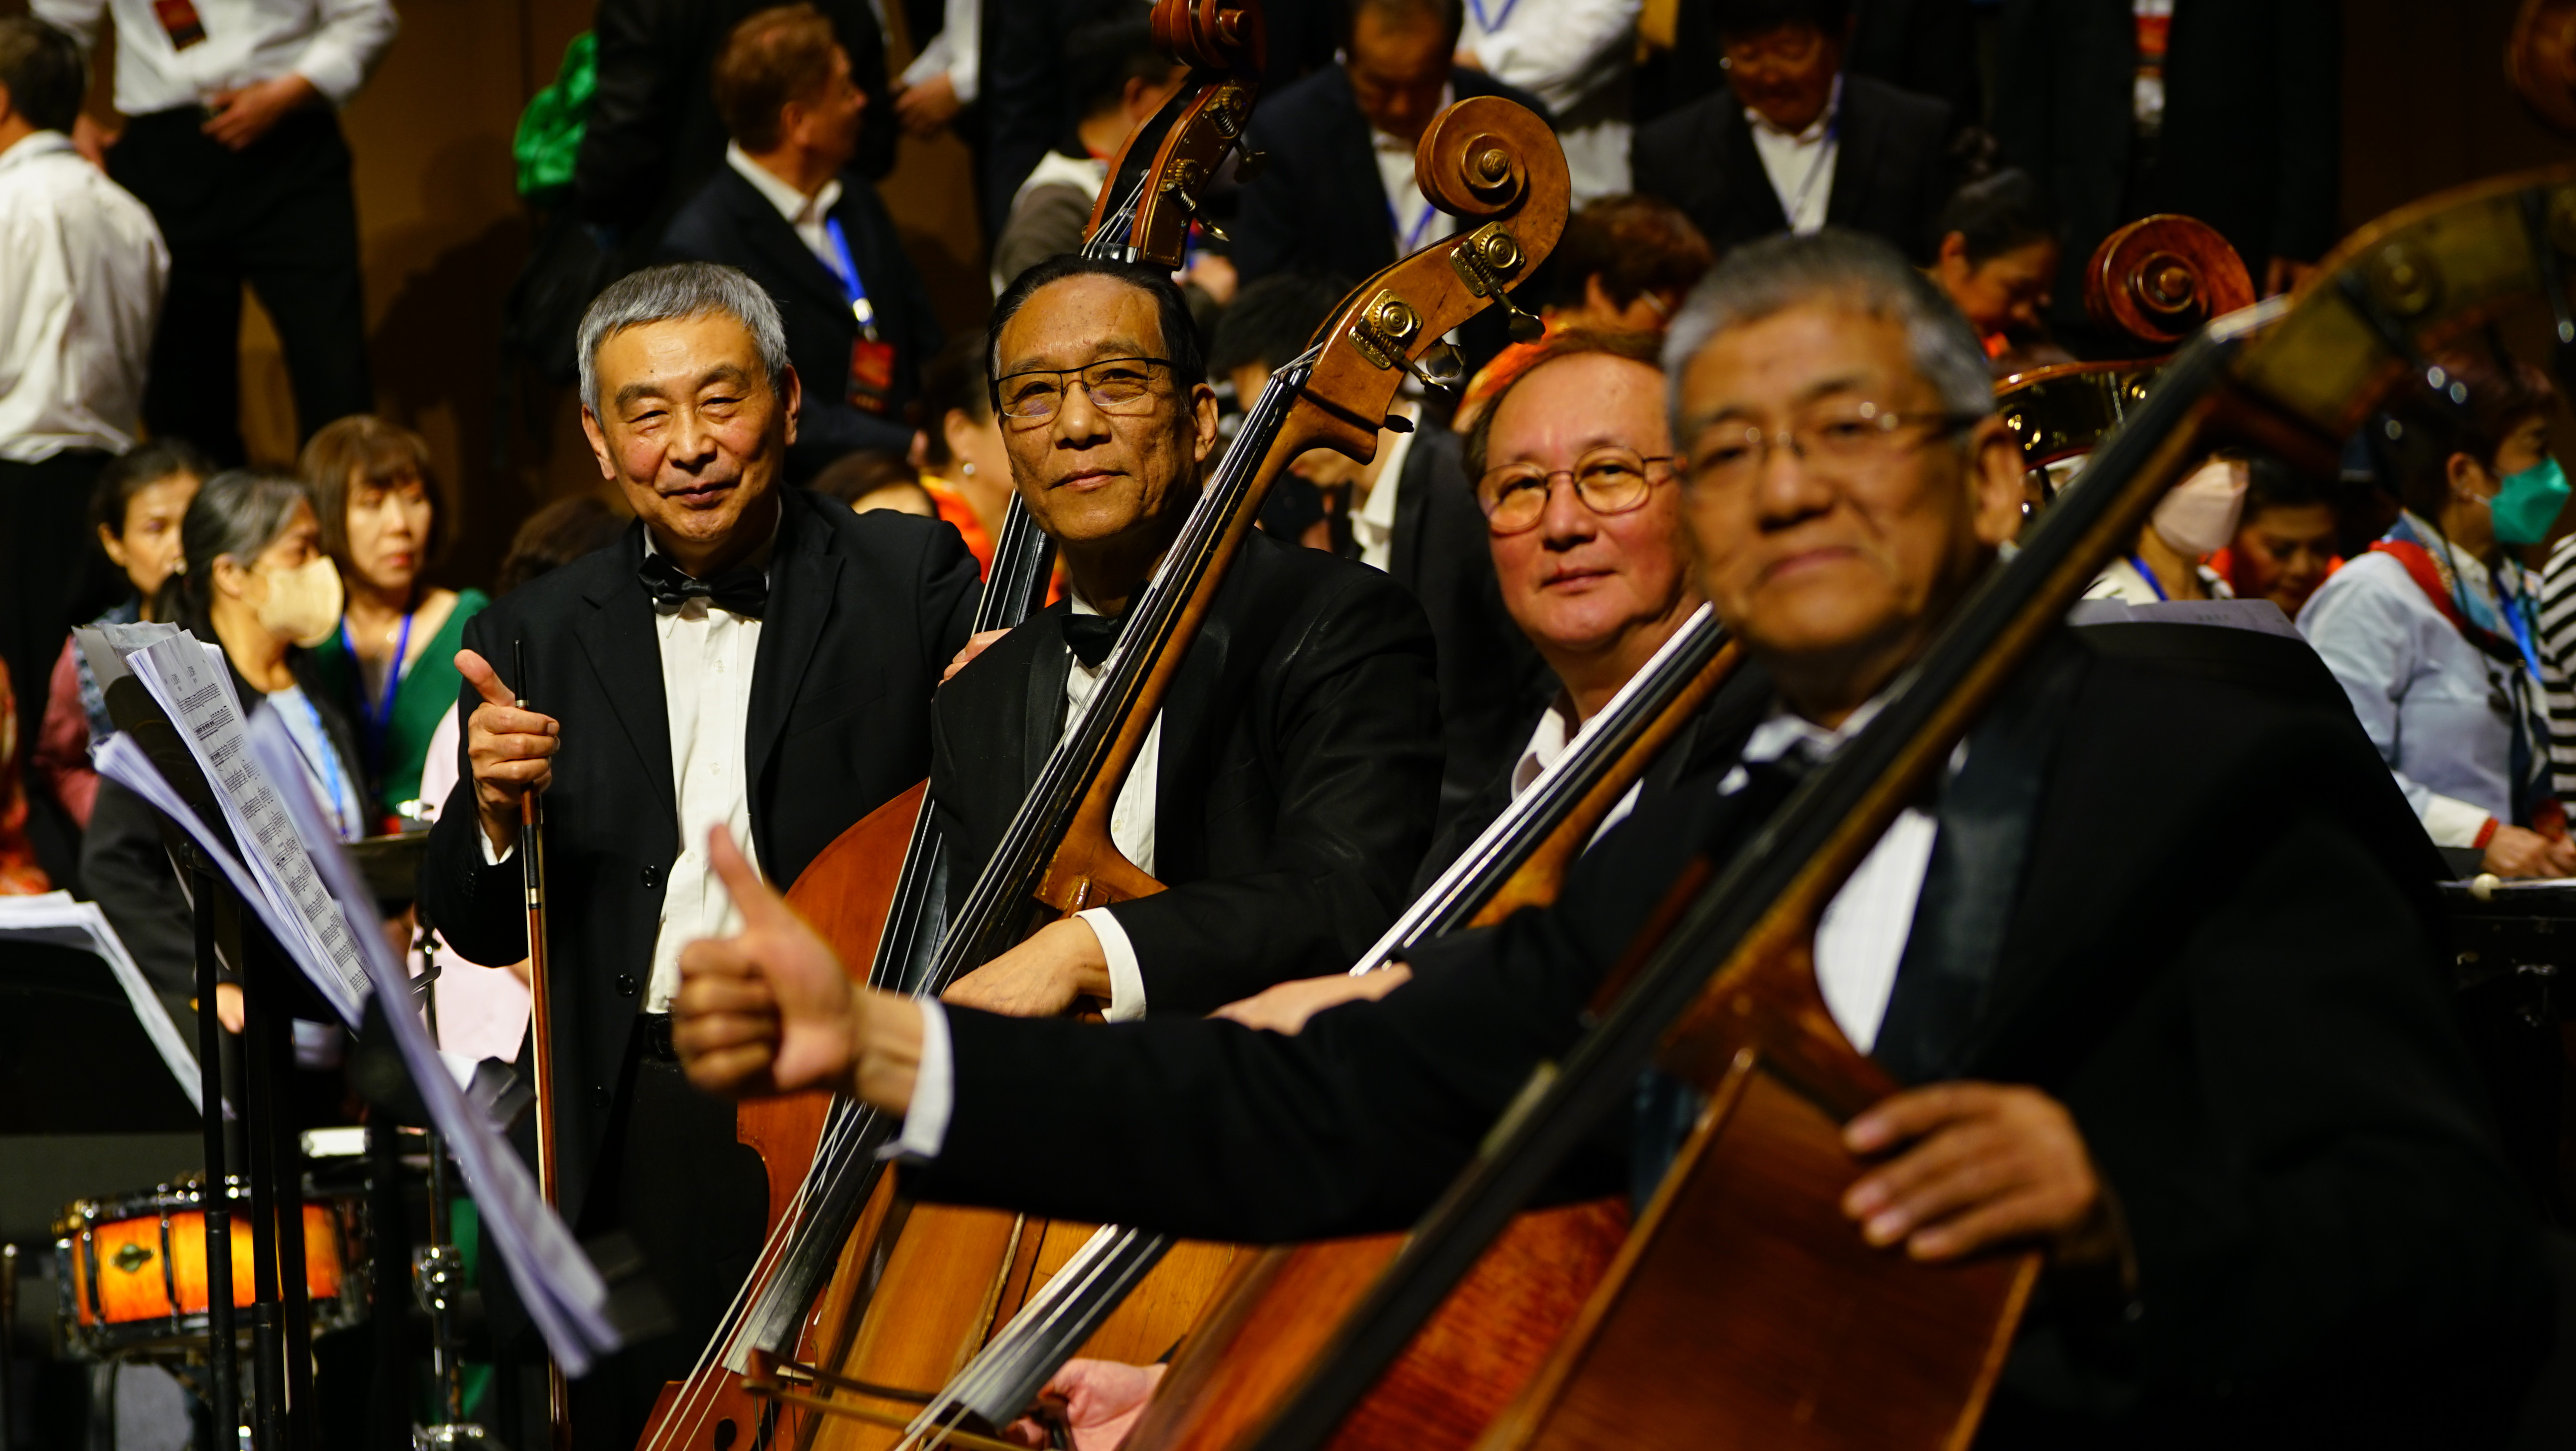 Experience the Yellow River Cantata concert